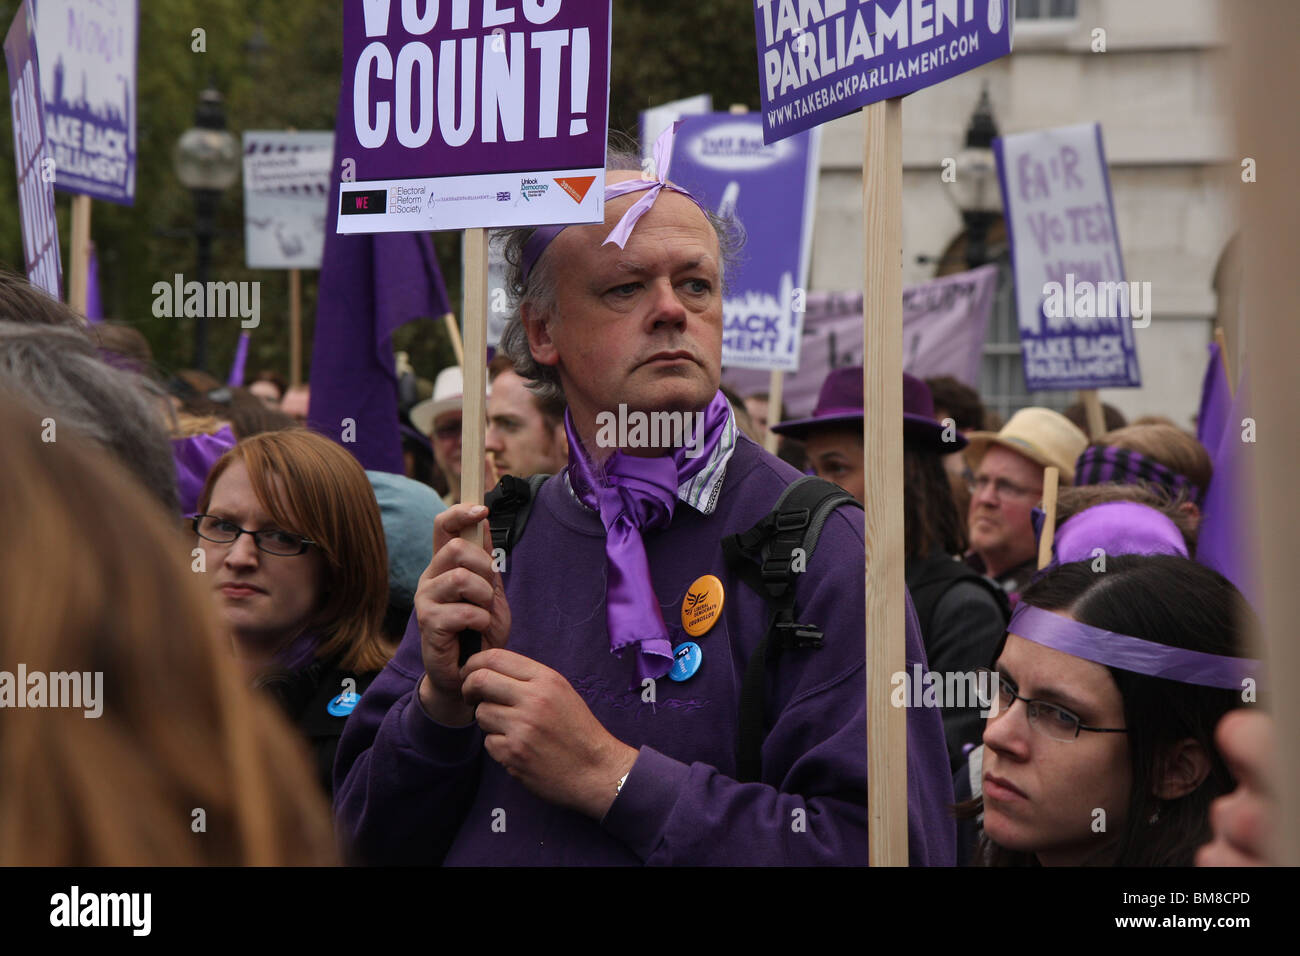 A demonstrator in favor of electoral reform at a political rally in London, May 15th 2010. Stock Photo